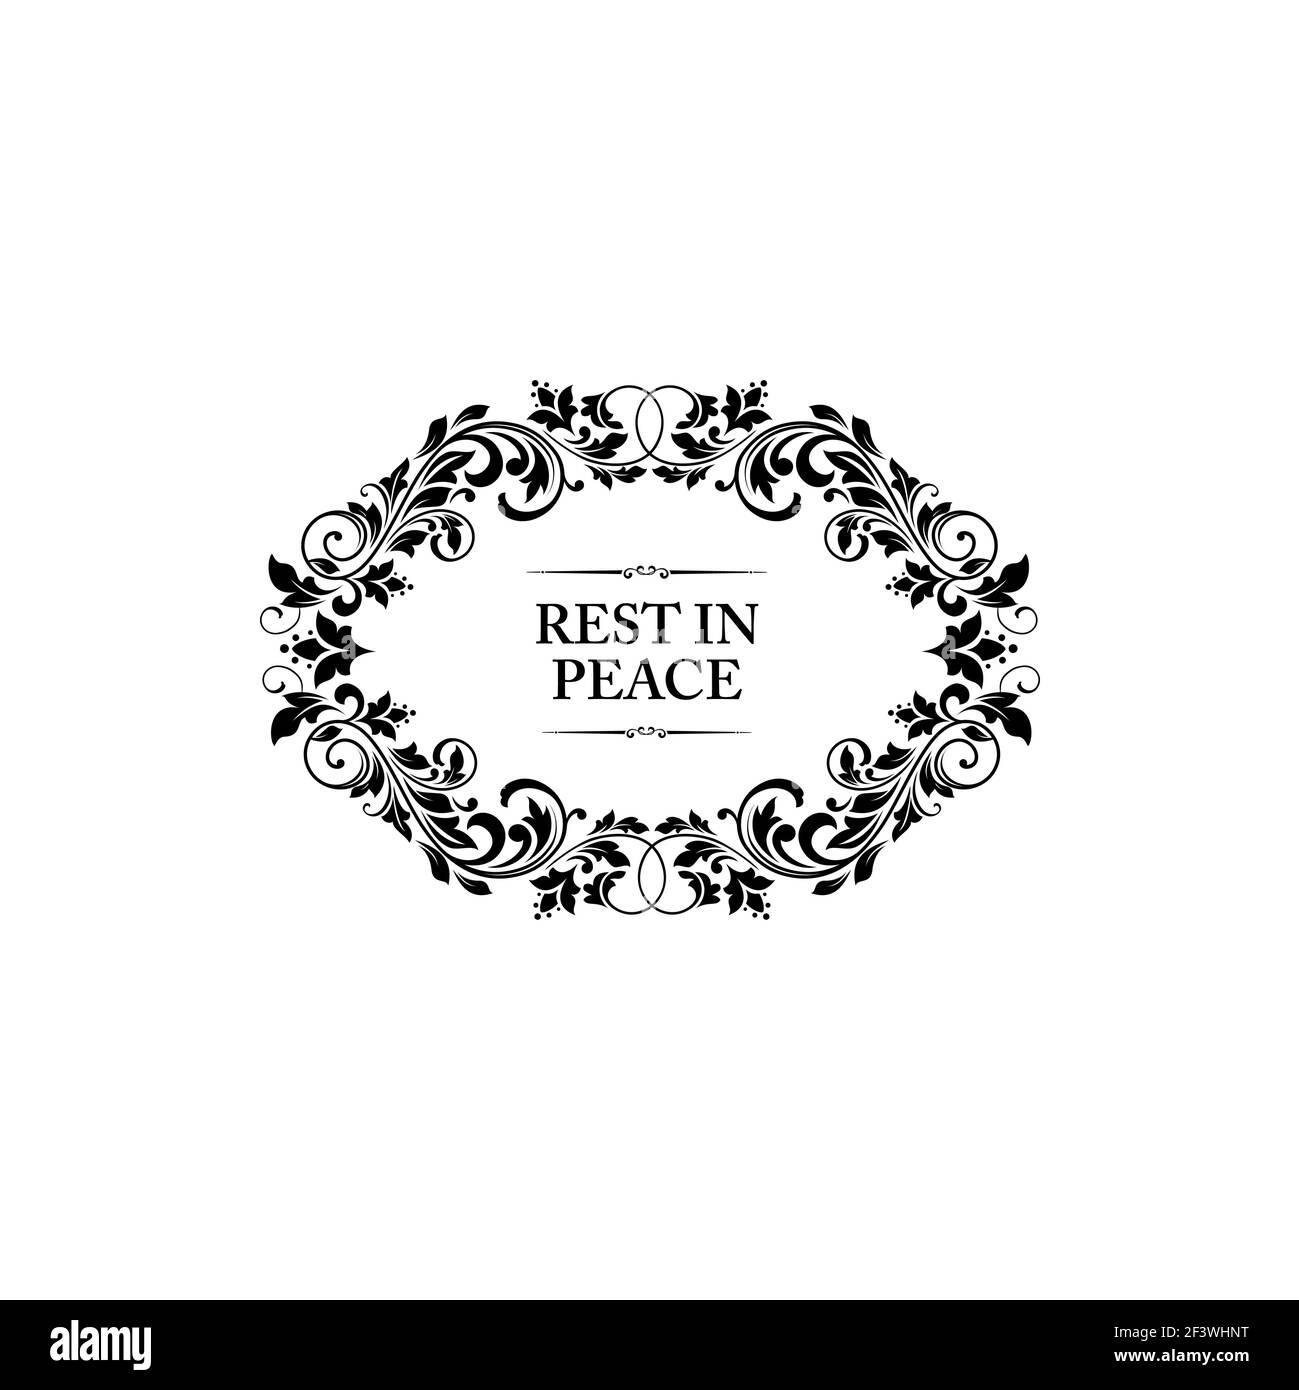 Rest in peace in oval floral frame isolated monochrome icon. Vector ornamental flowers and lettering on tombstone or gravestone, rip sorrowful inscrip Stock Vector